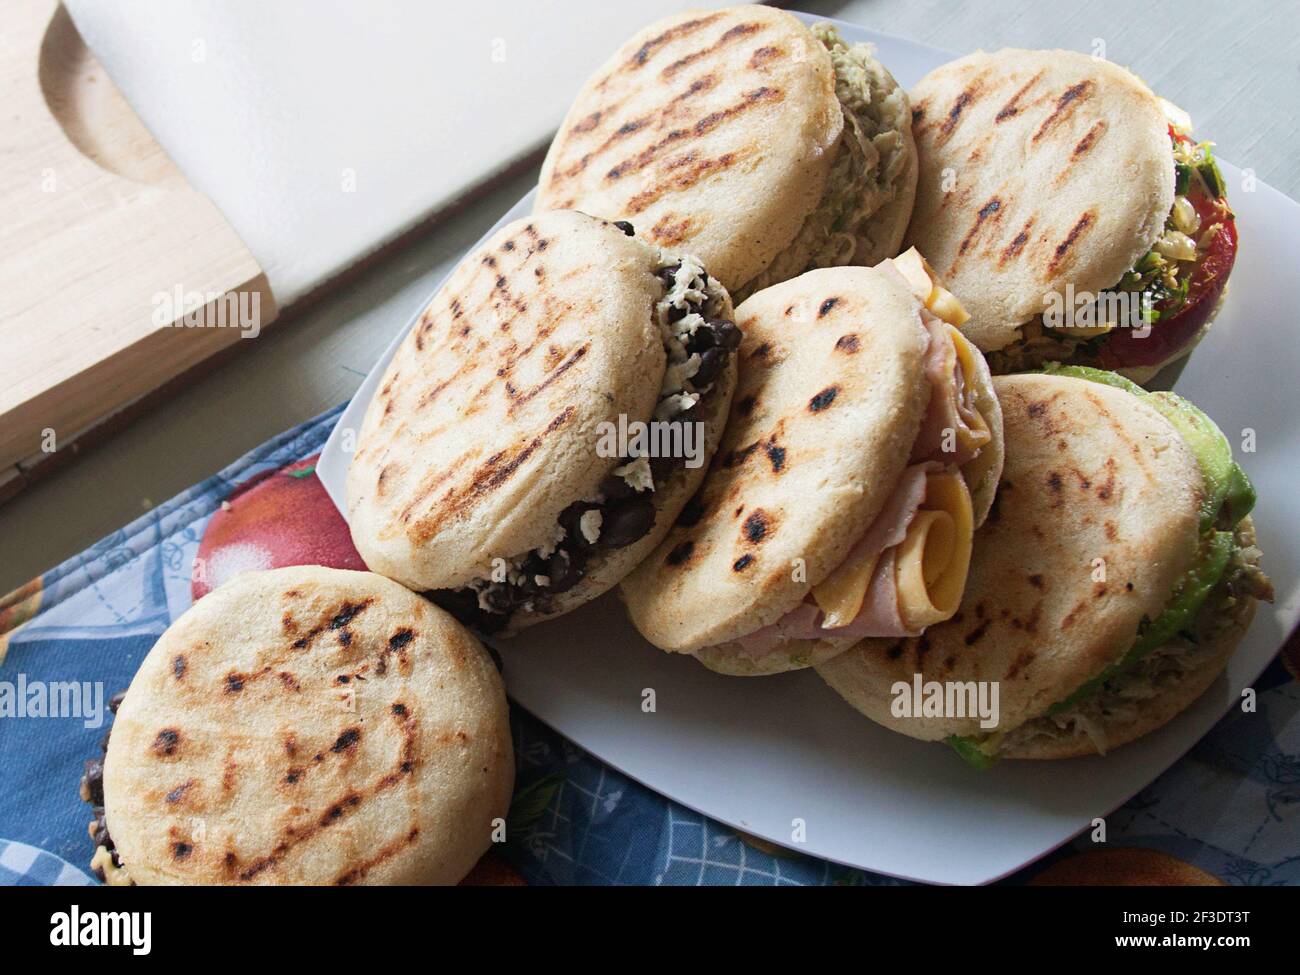 https://c8.alamy.com/comp/2F3DT3T/arepas-are-is-a-type-of-food-made-of-ground-maize-dough-or-cooked-flour-prominent-in-the-cuisine-of-colombia-and-venezuela-here-homemade-venezuelan-arepas-close-up-2F3DT3T.jpg